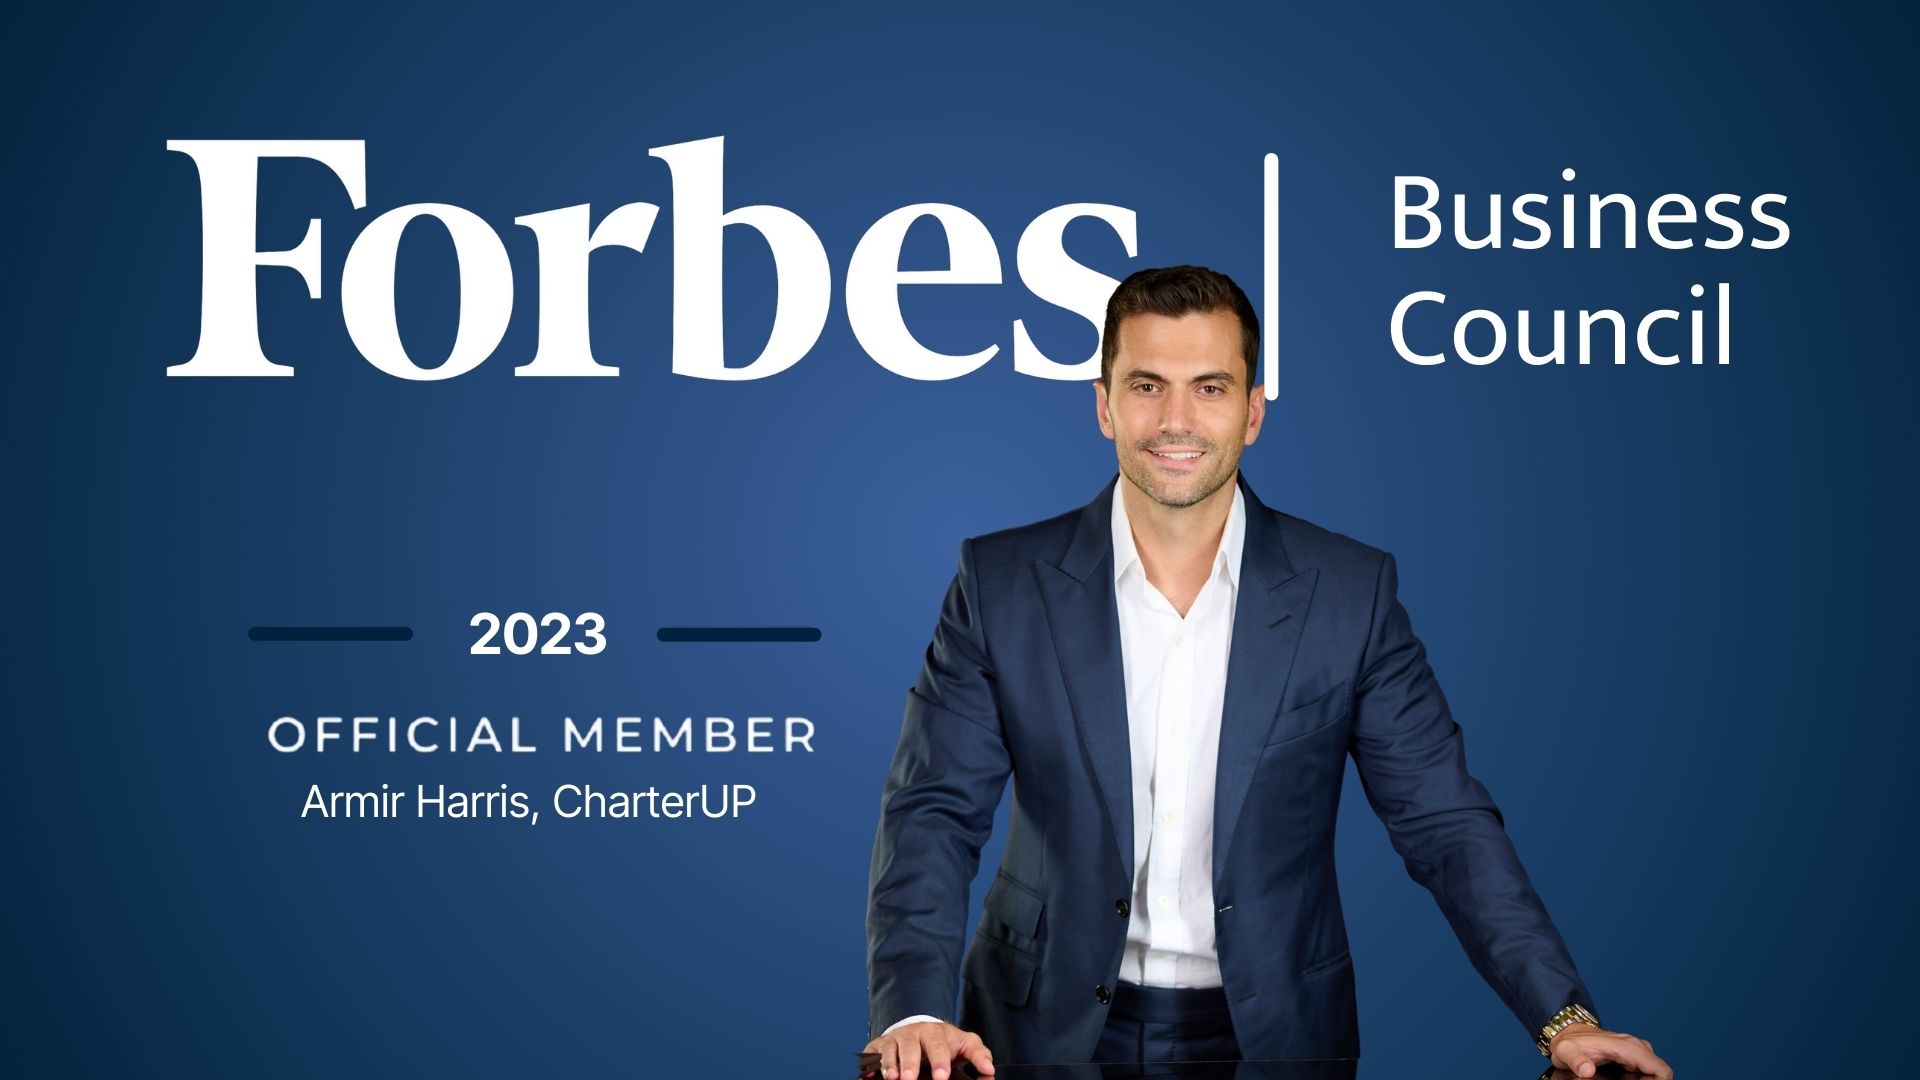 Armir Harris, CEO of CharterUP, has been invited to join the Forbes Business Council.